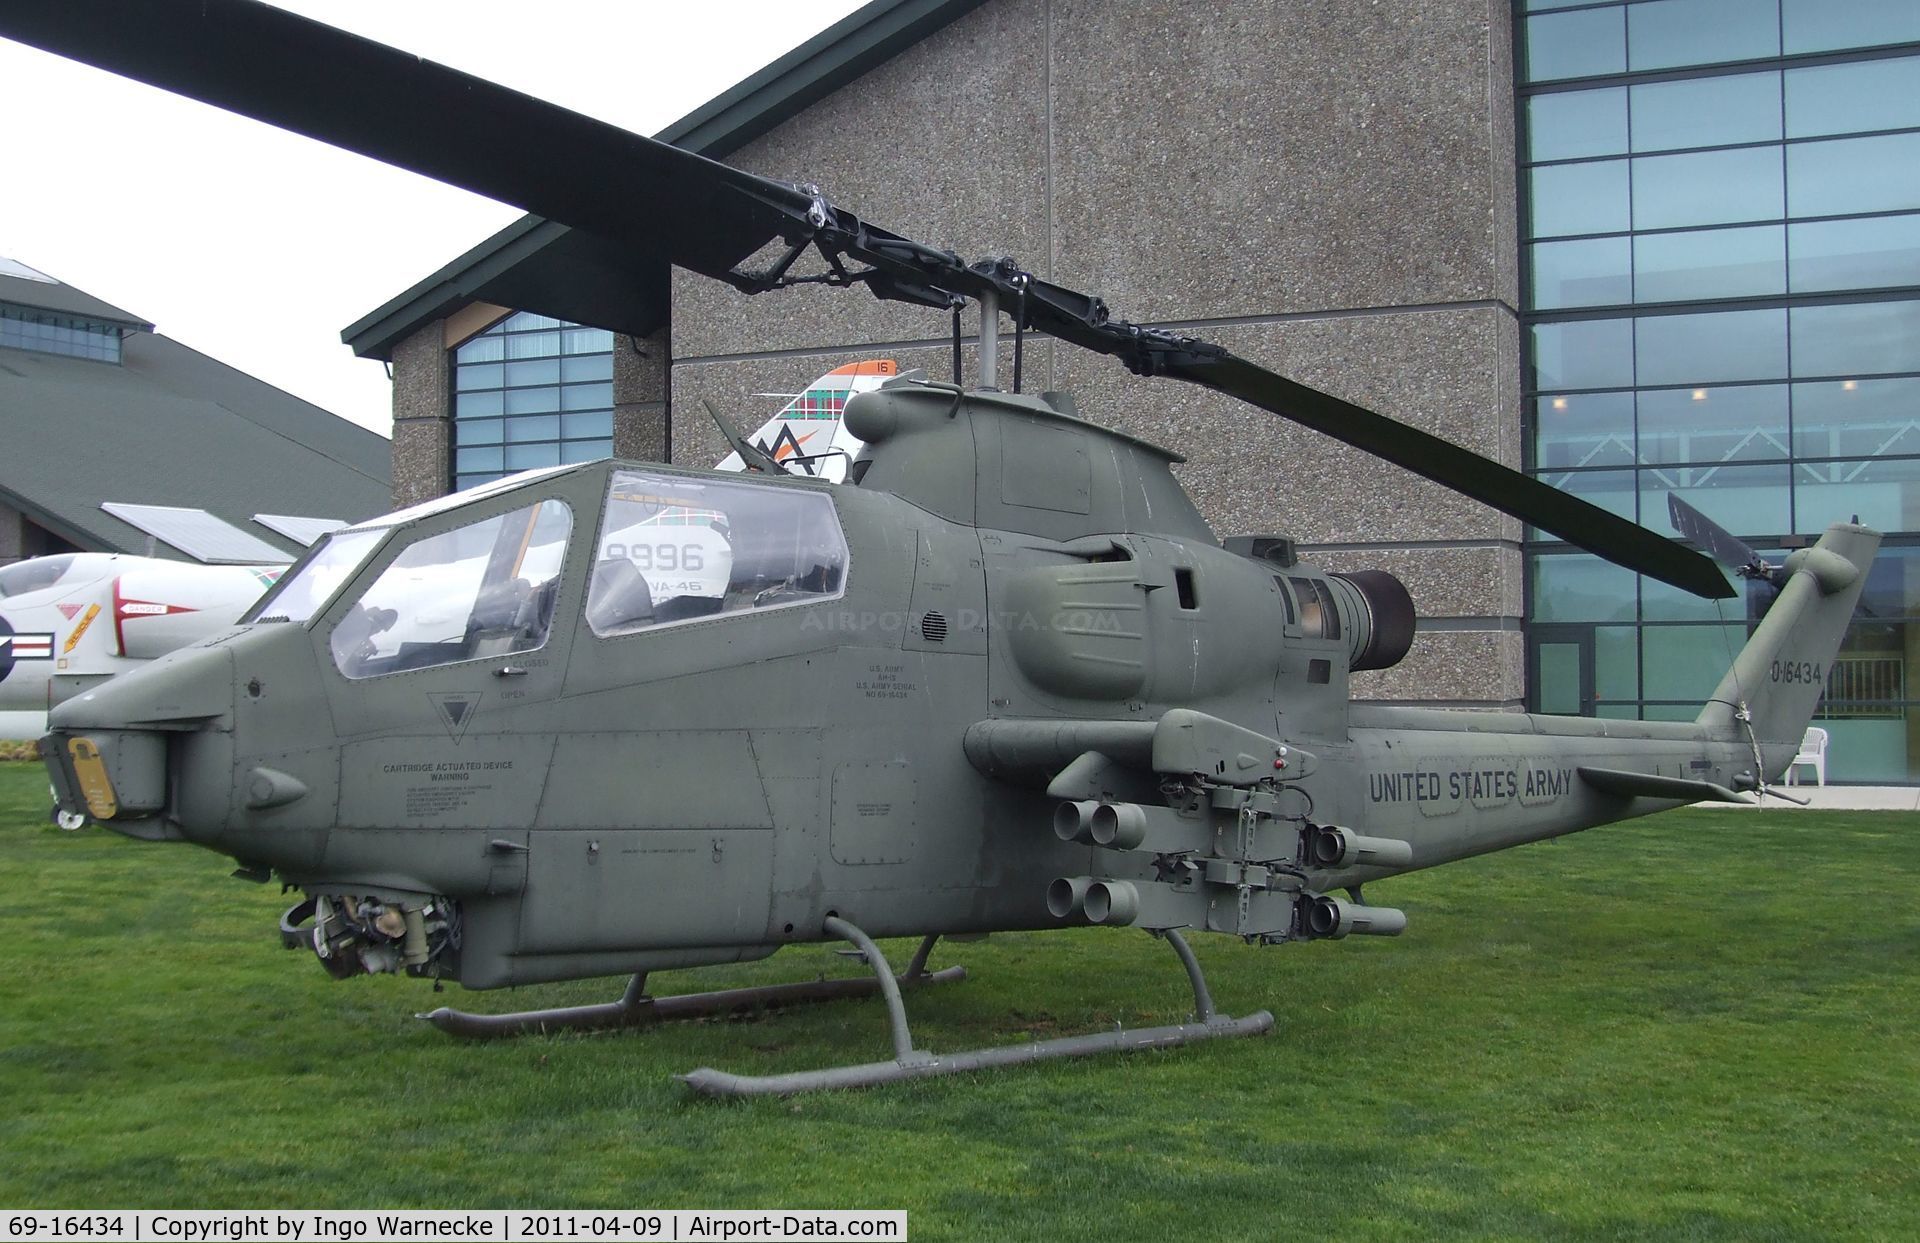 69-16434, 1969 Bell AH-1F Cobra C/N 20866, Bell AH-1F Cobra at the Evergreen Aviation & Space Museum, McMinnville OR